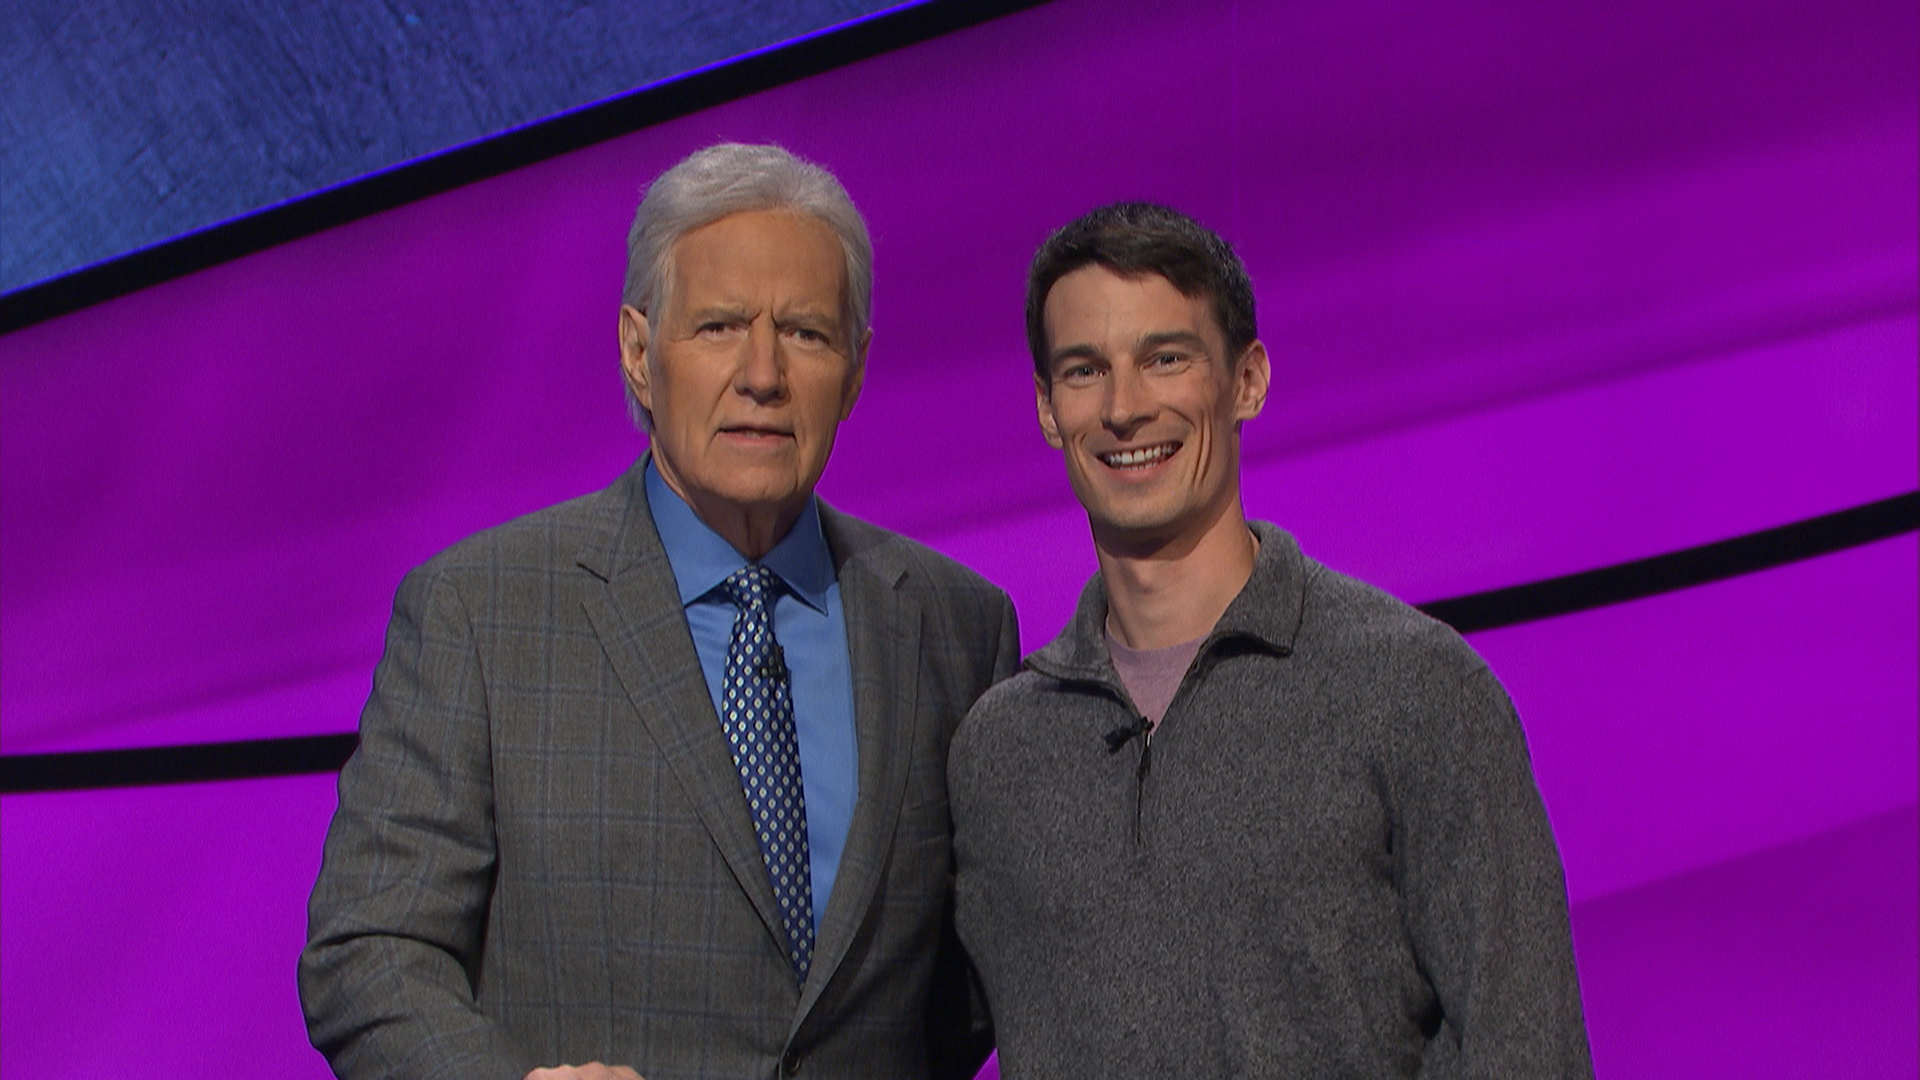 Nathan on Jeopardy